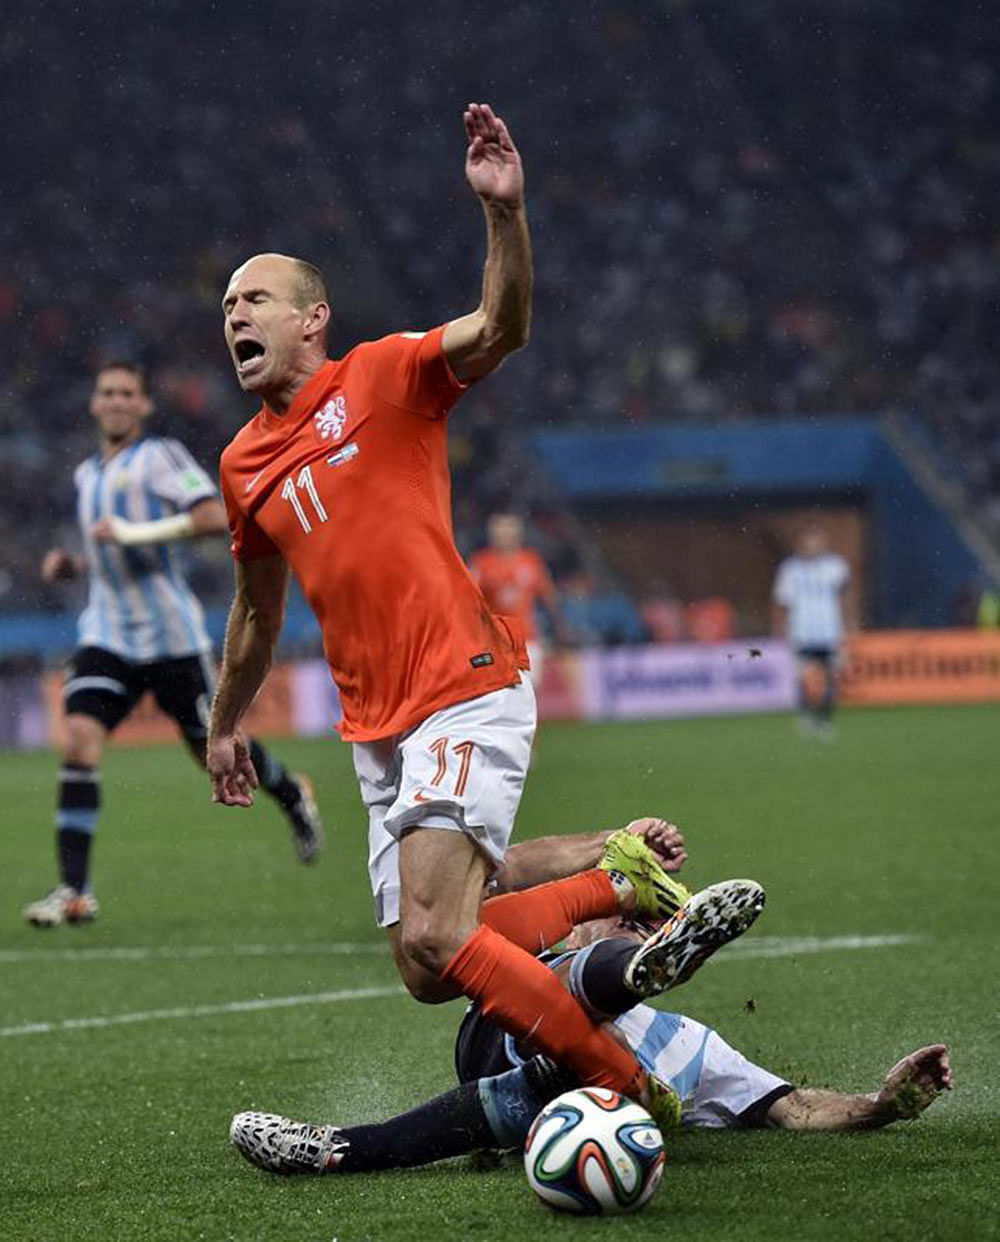 Netherlands' Arjen Robben goes down under a challenge from Argentina's Martin Demichelis during the World Cup semifinal soccer match between the Netherlands and Argentina at the Itaquerao Stadium in Sao Paulo Brazil, Wednesday, July 9, 2014.